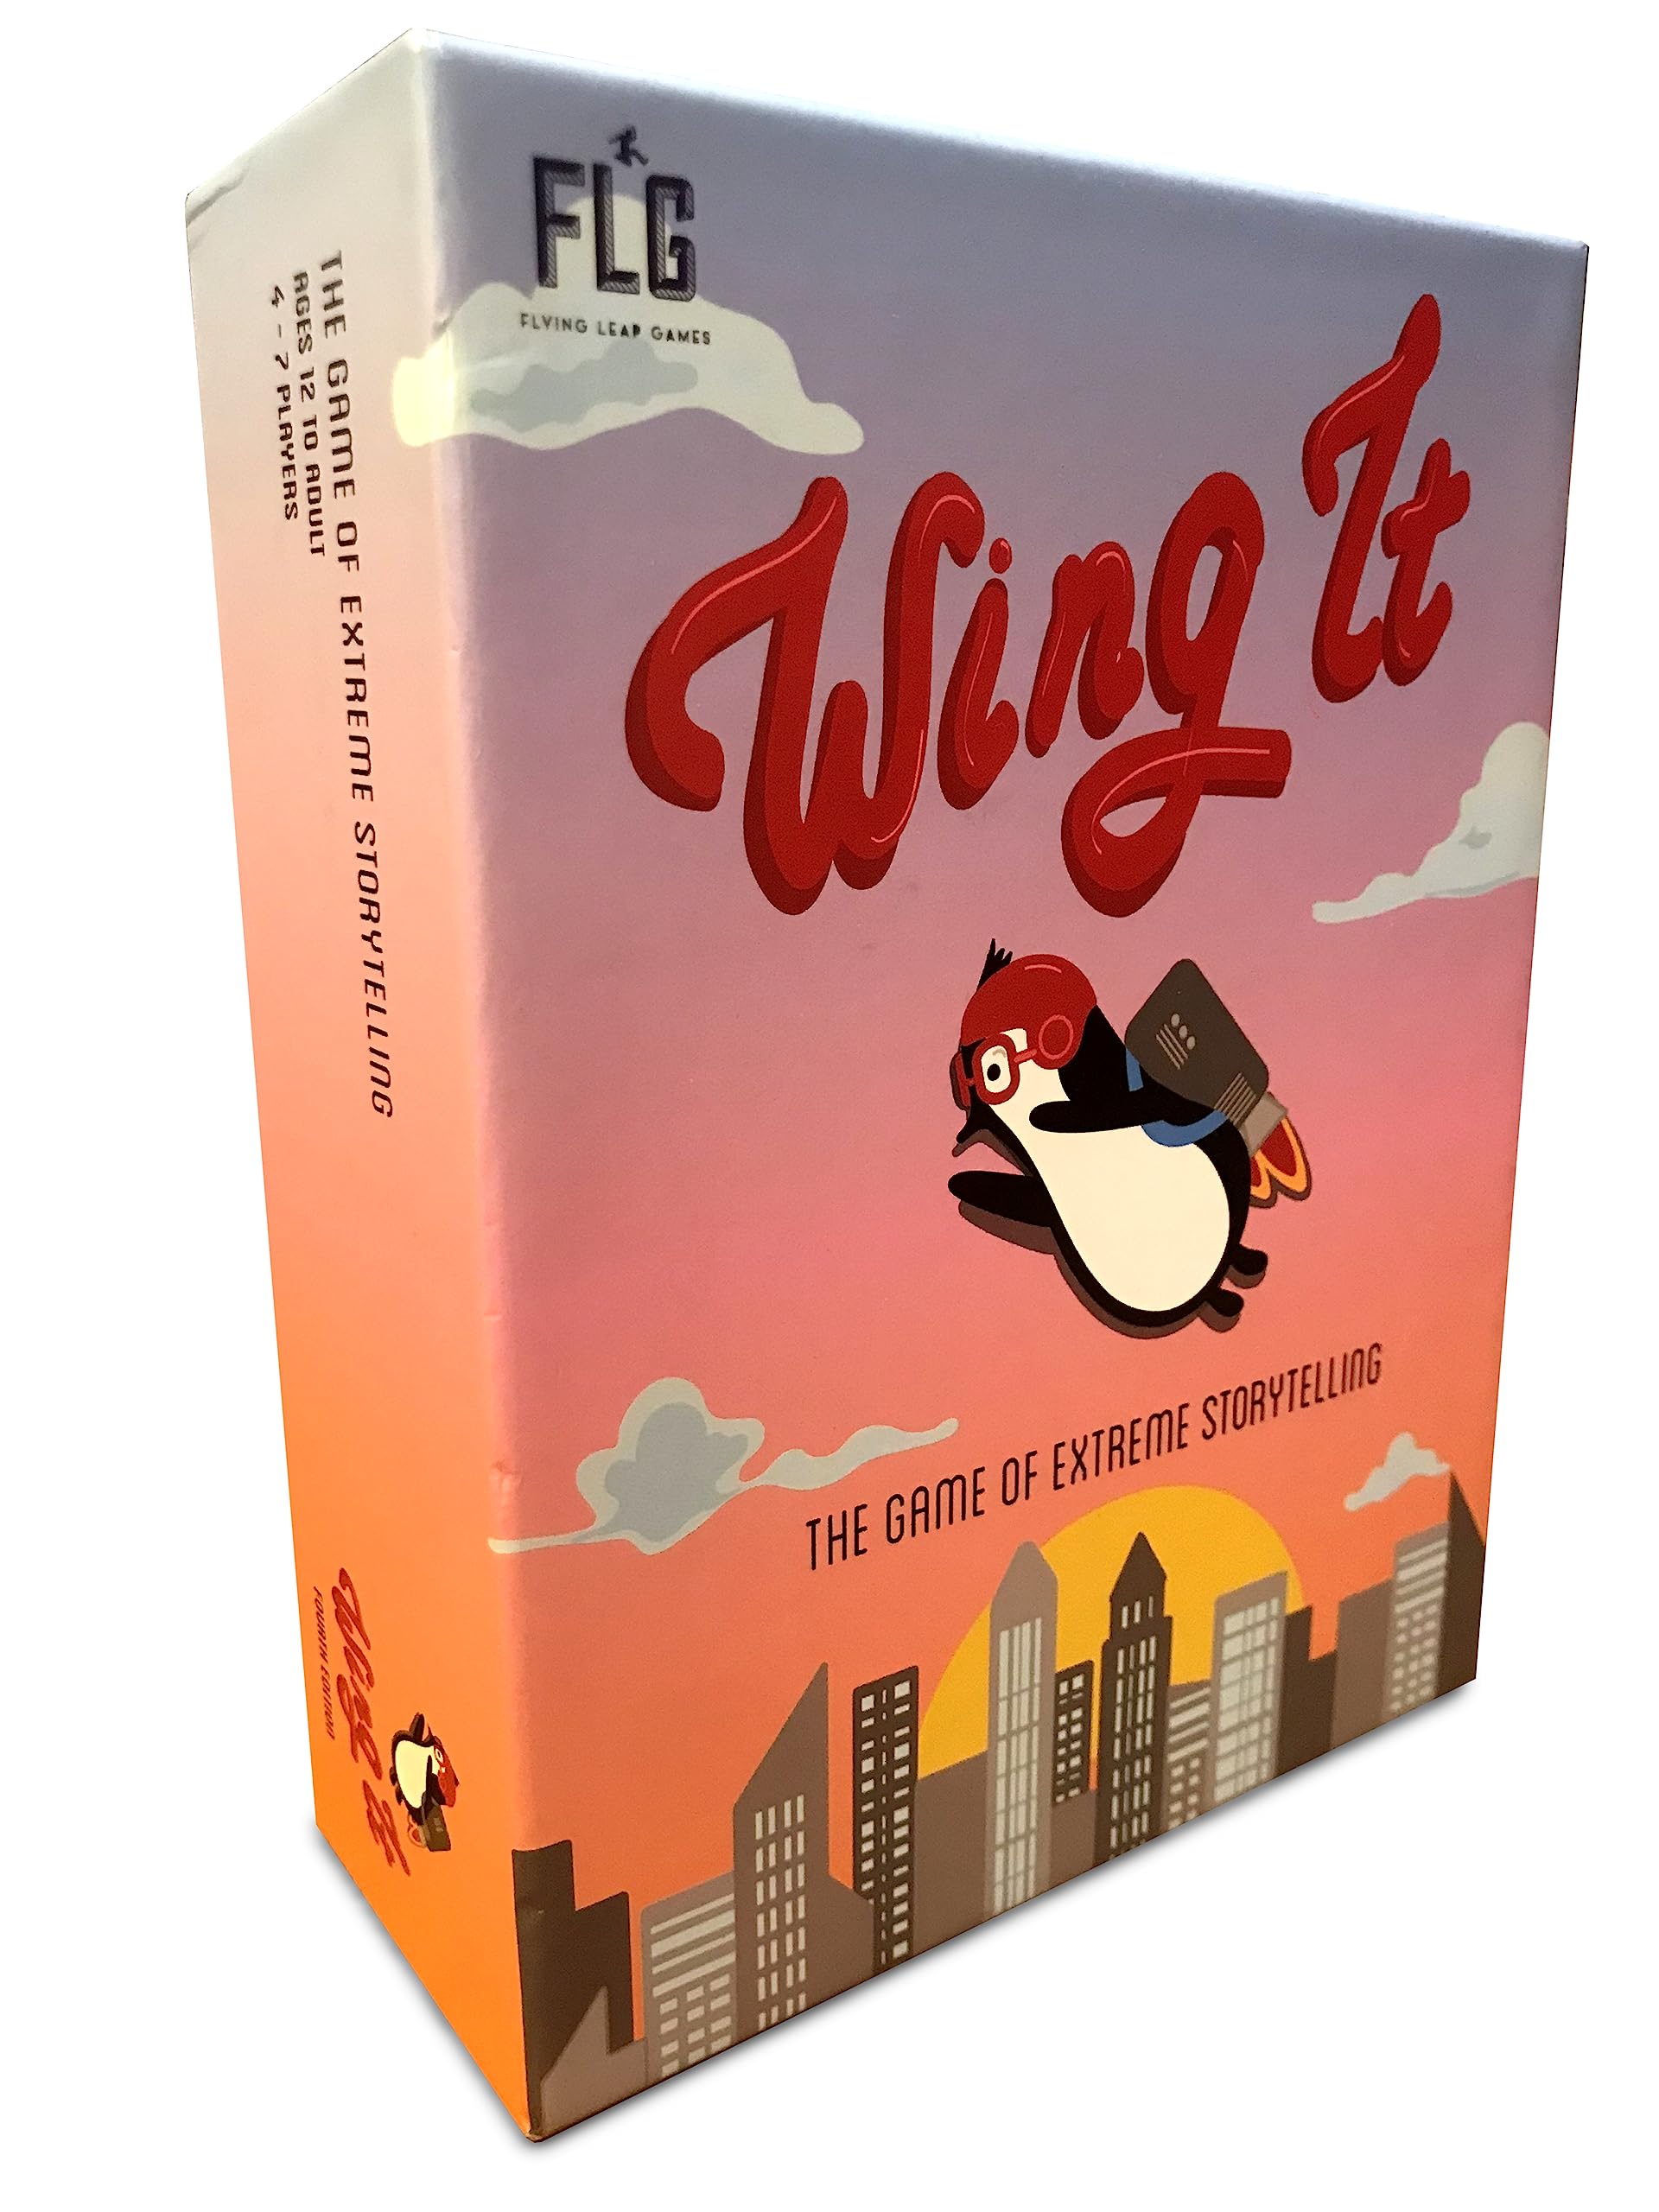 FLG FLYING LEAP GAMES Wing It: The Game of Extreme Storytelling